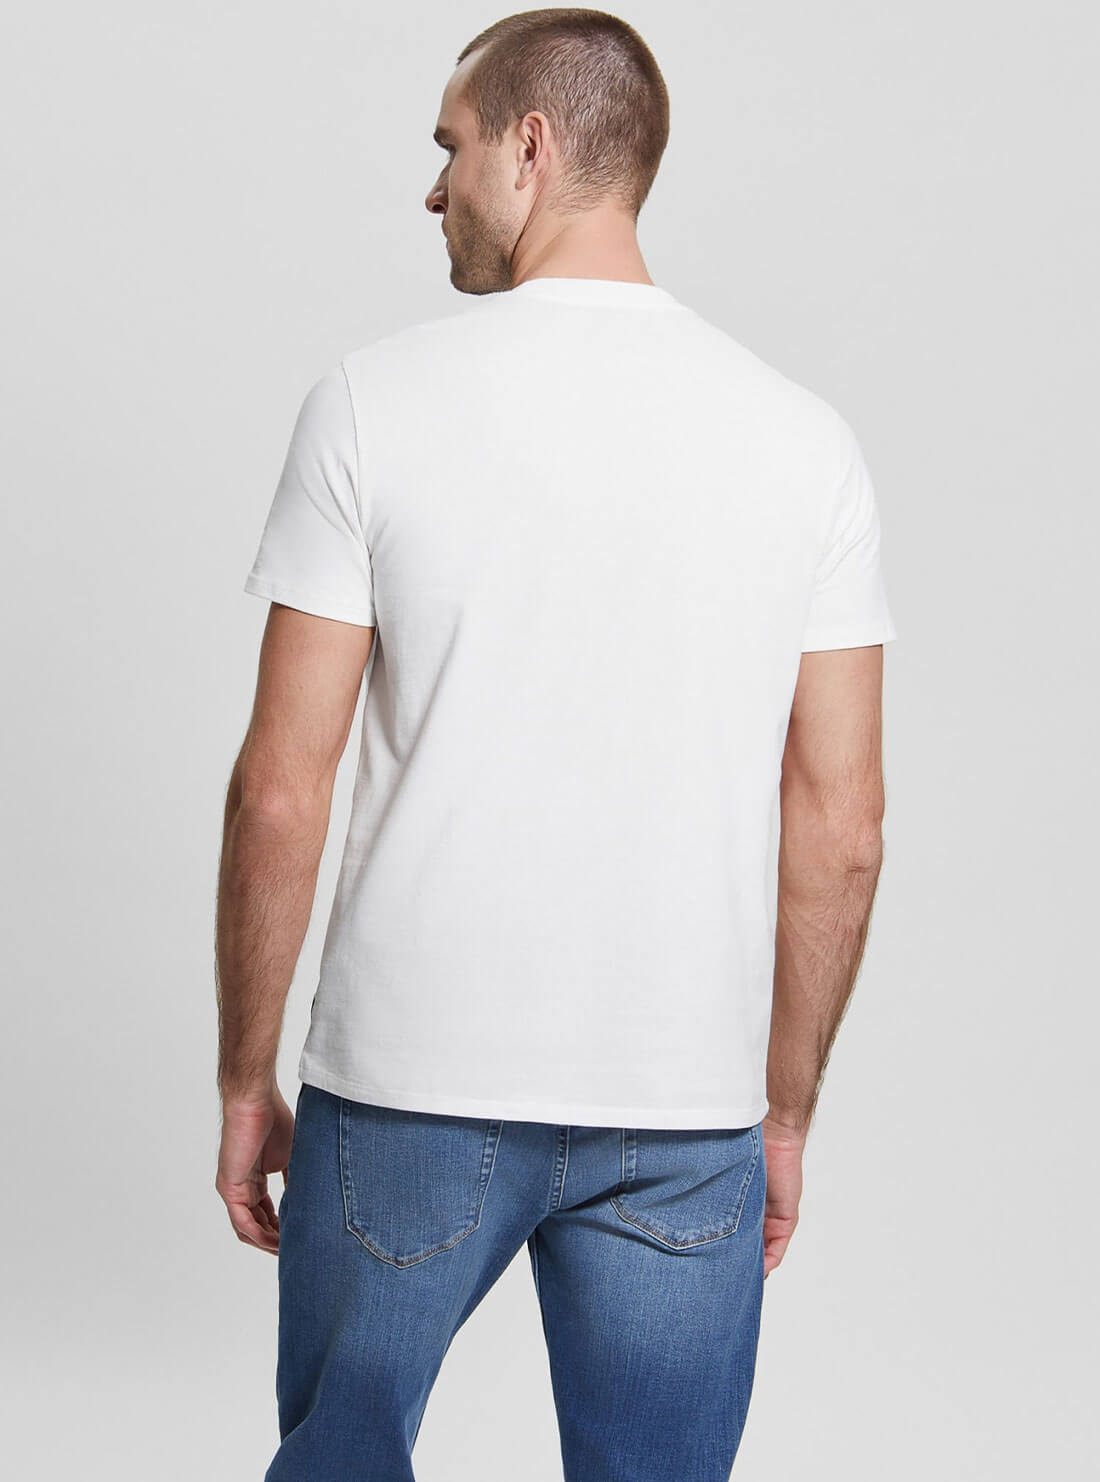 White Tokyo Collage T-Shirt | GUESS Men's Apparel | Back view